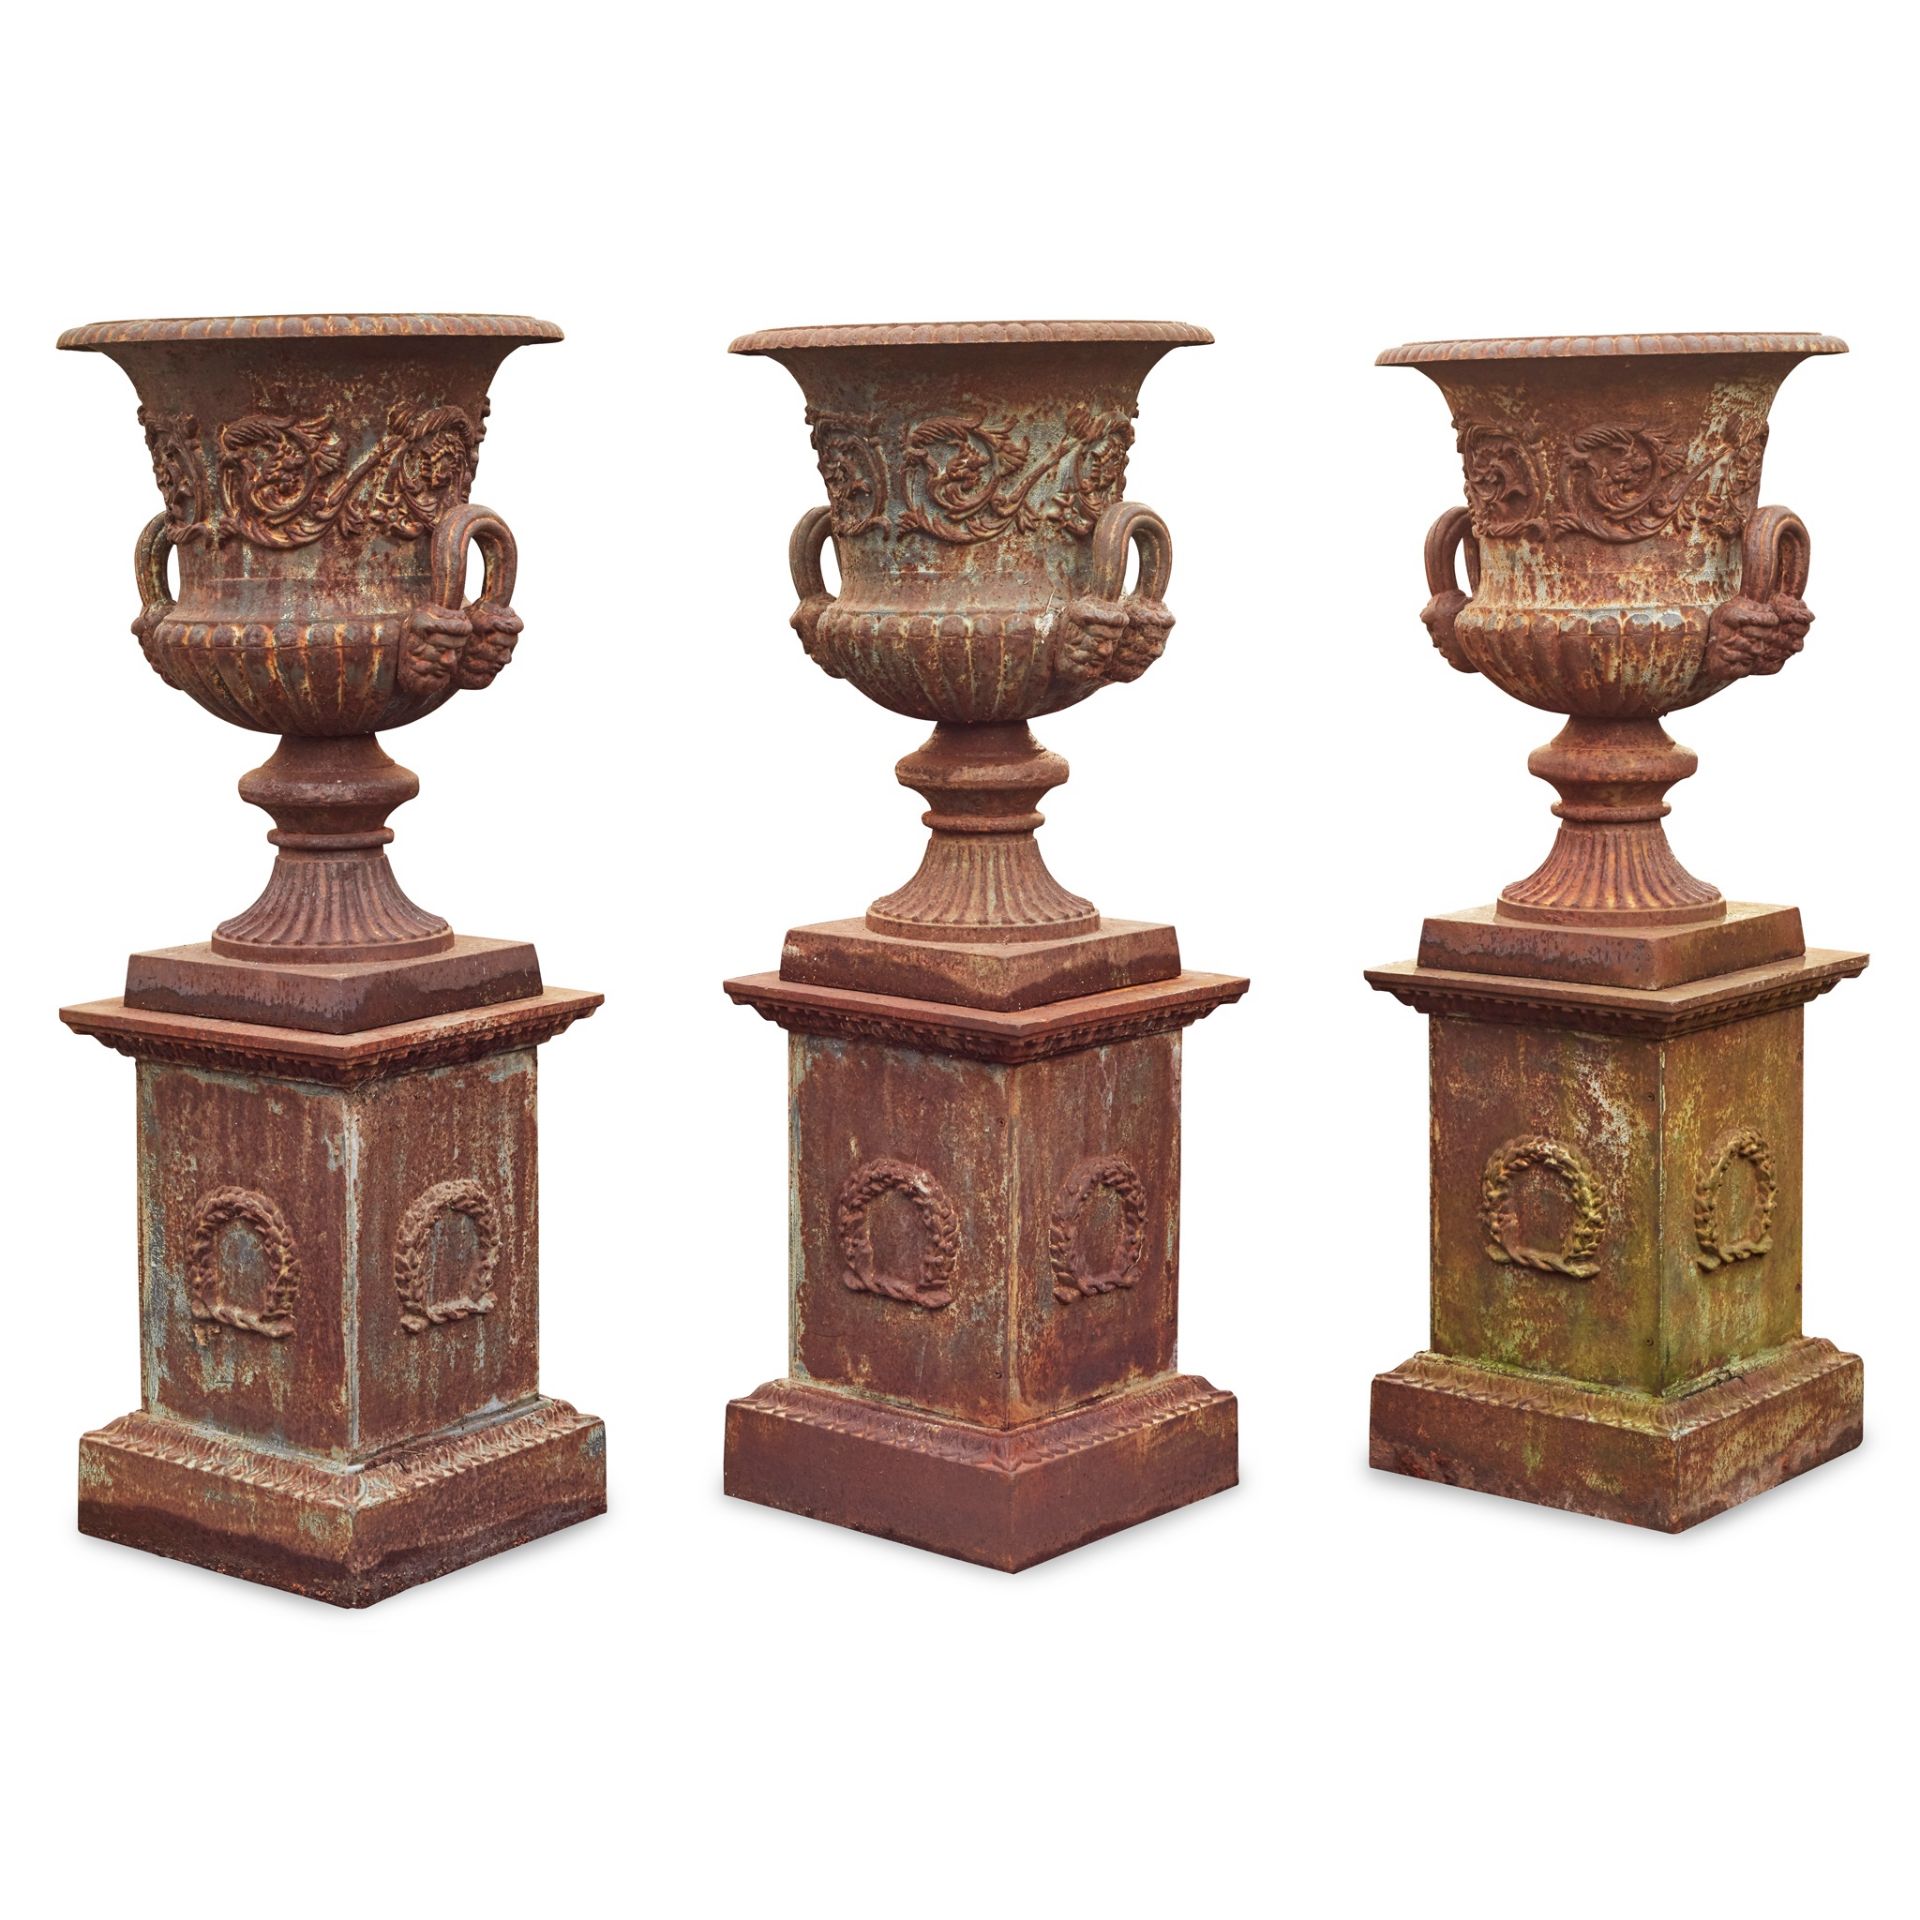 GROUP OF THREE CAST IRON GARDEN URNS AND PLINTHS 20TH CENTURY